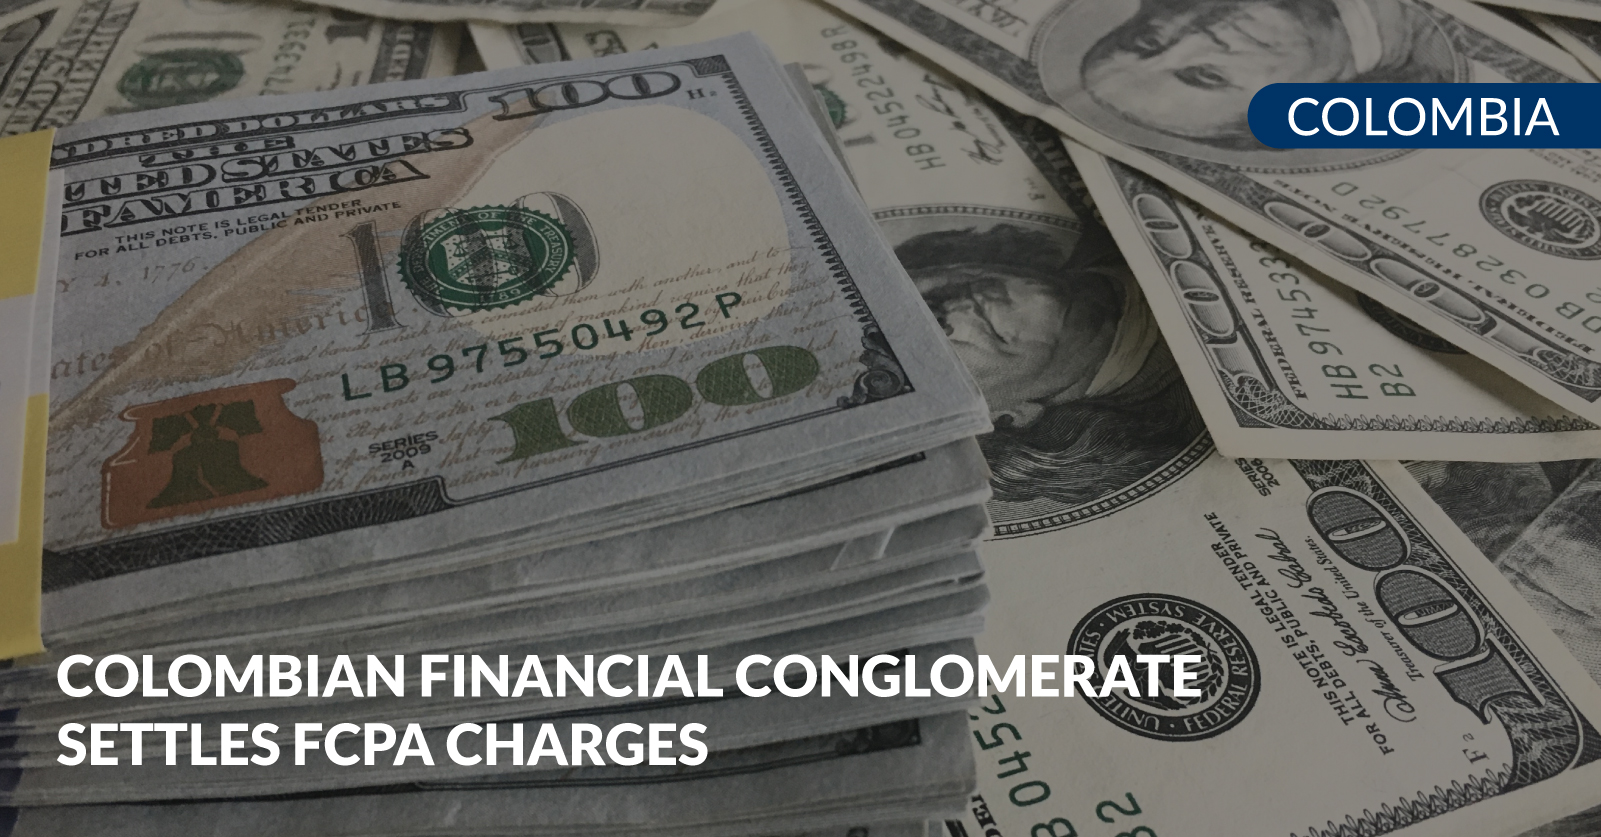 FCPA charges